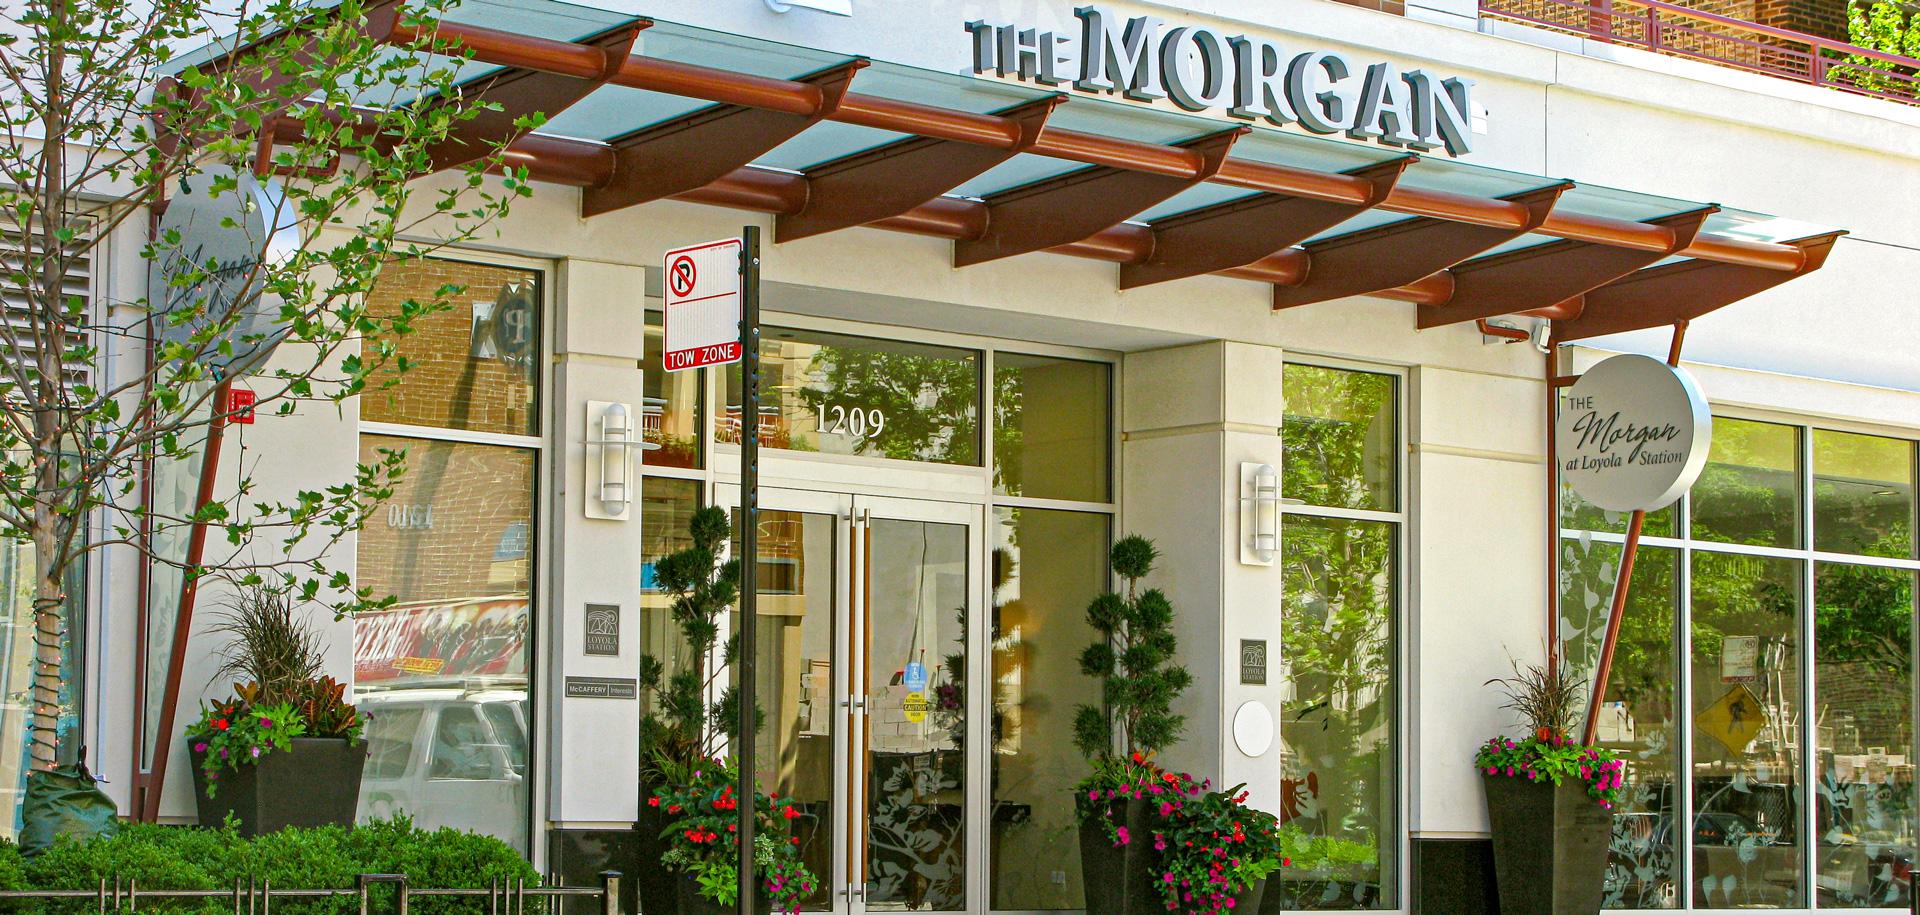 Image of the Arthur Ave entrance of the Morgan At Loyola Station